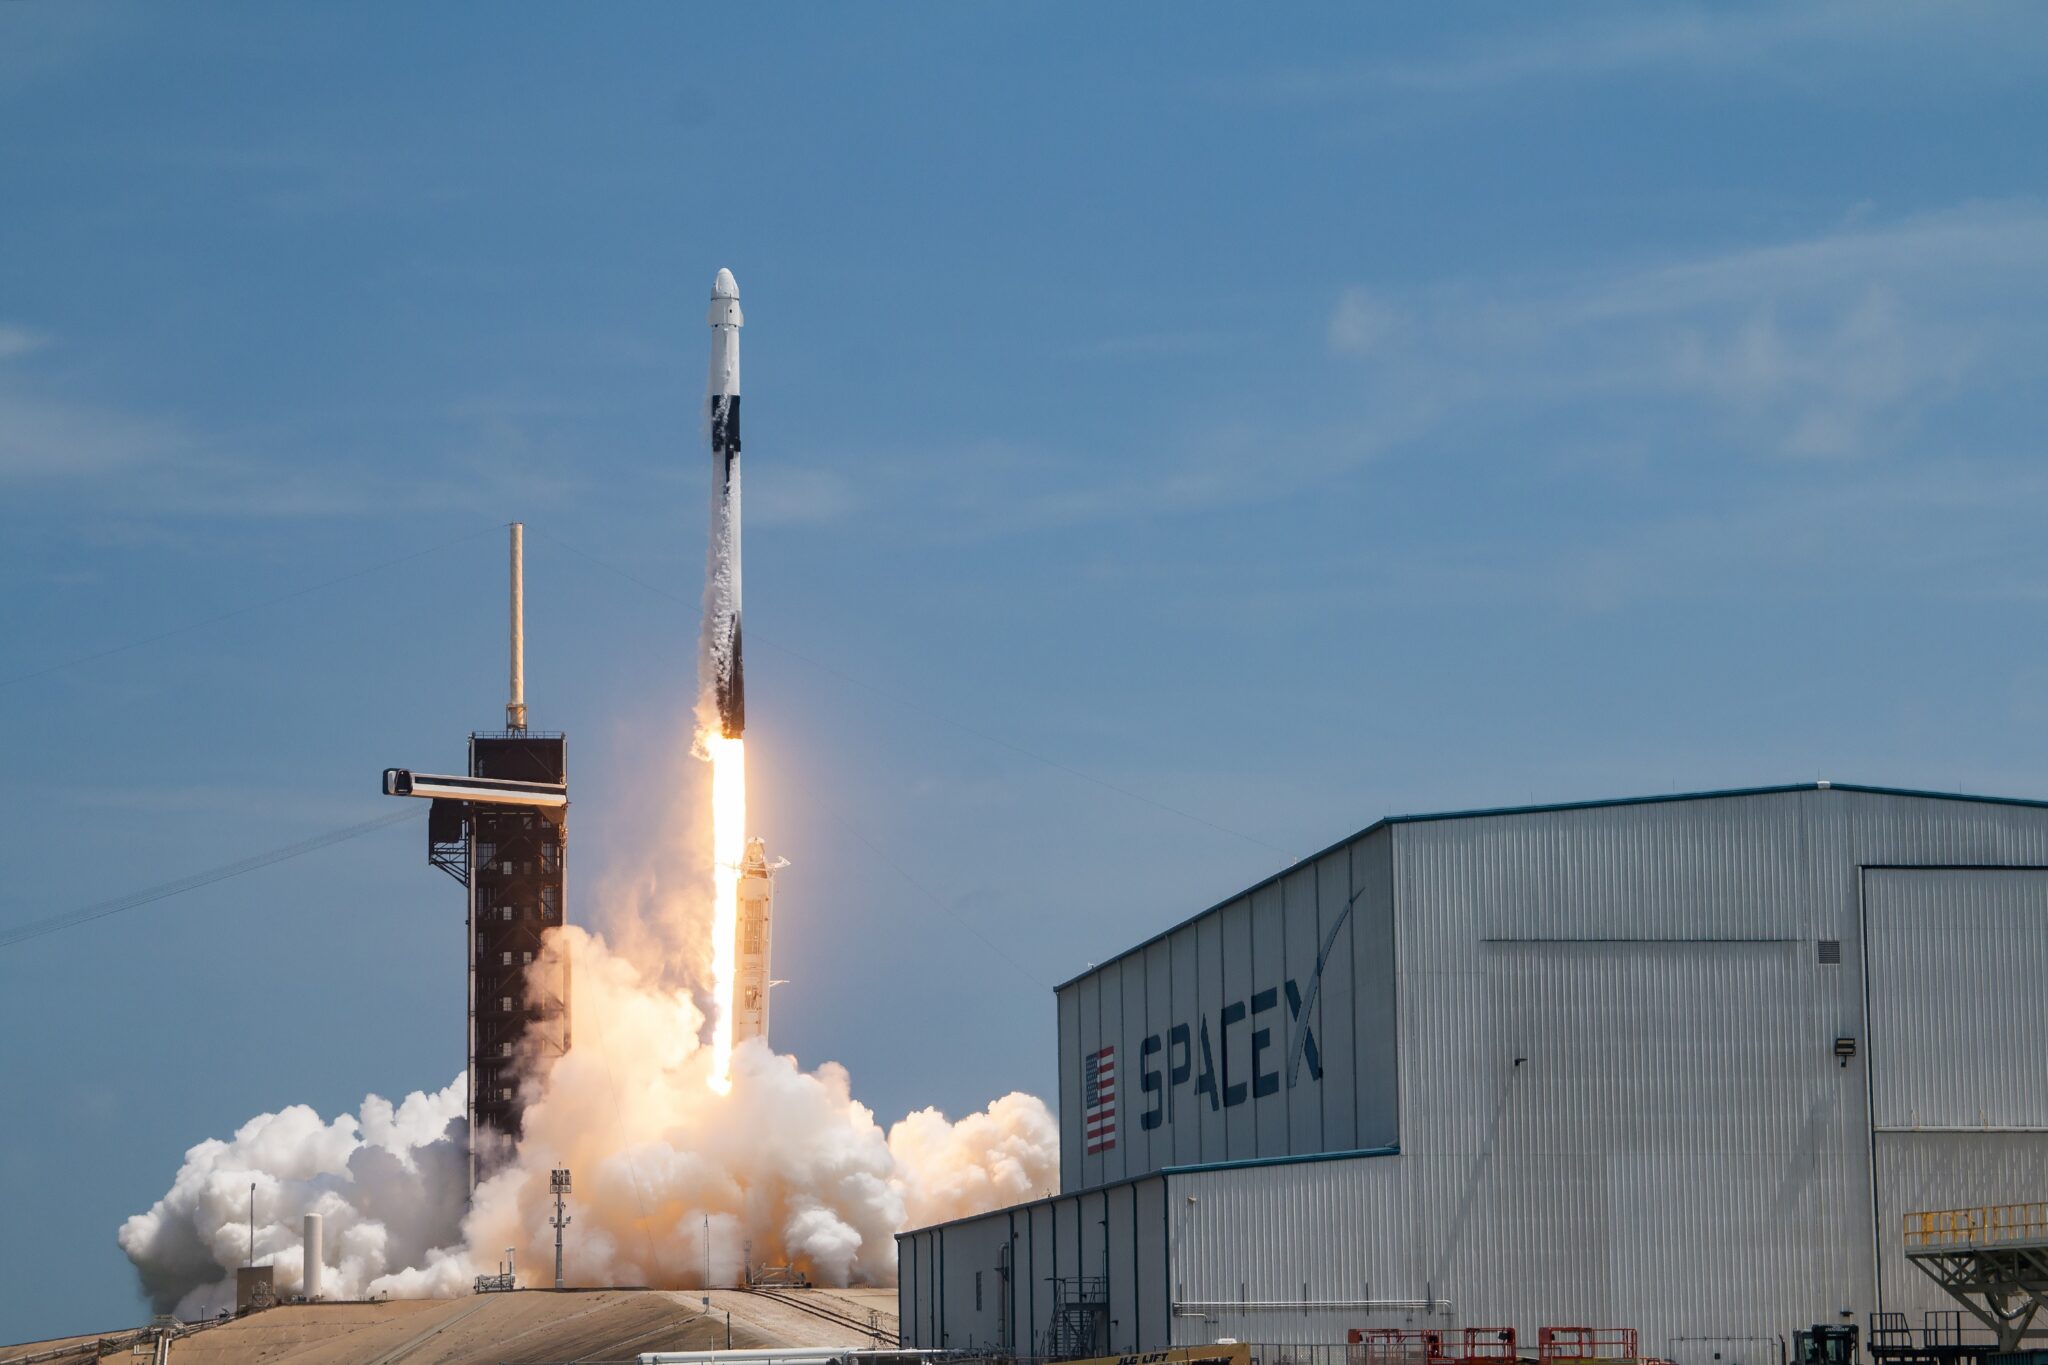 Falcon 9 puts Dragon CRS-28 resupply freighter into orbit on way to ISS